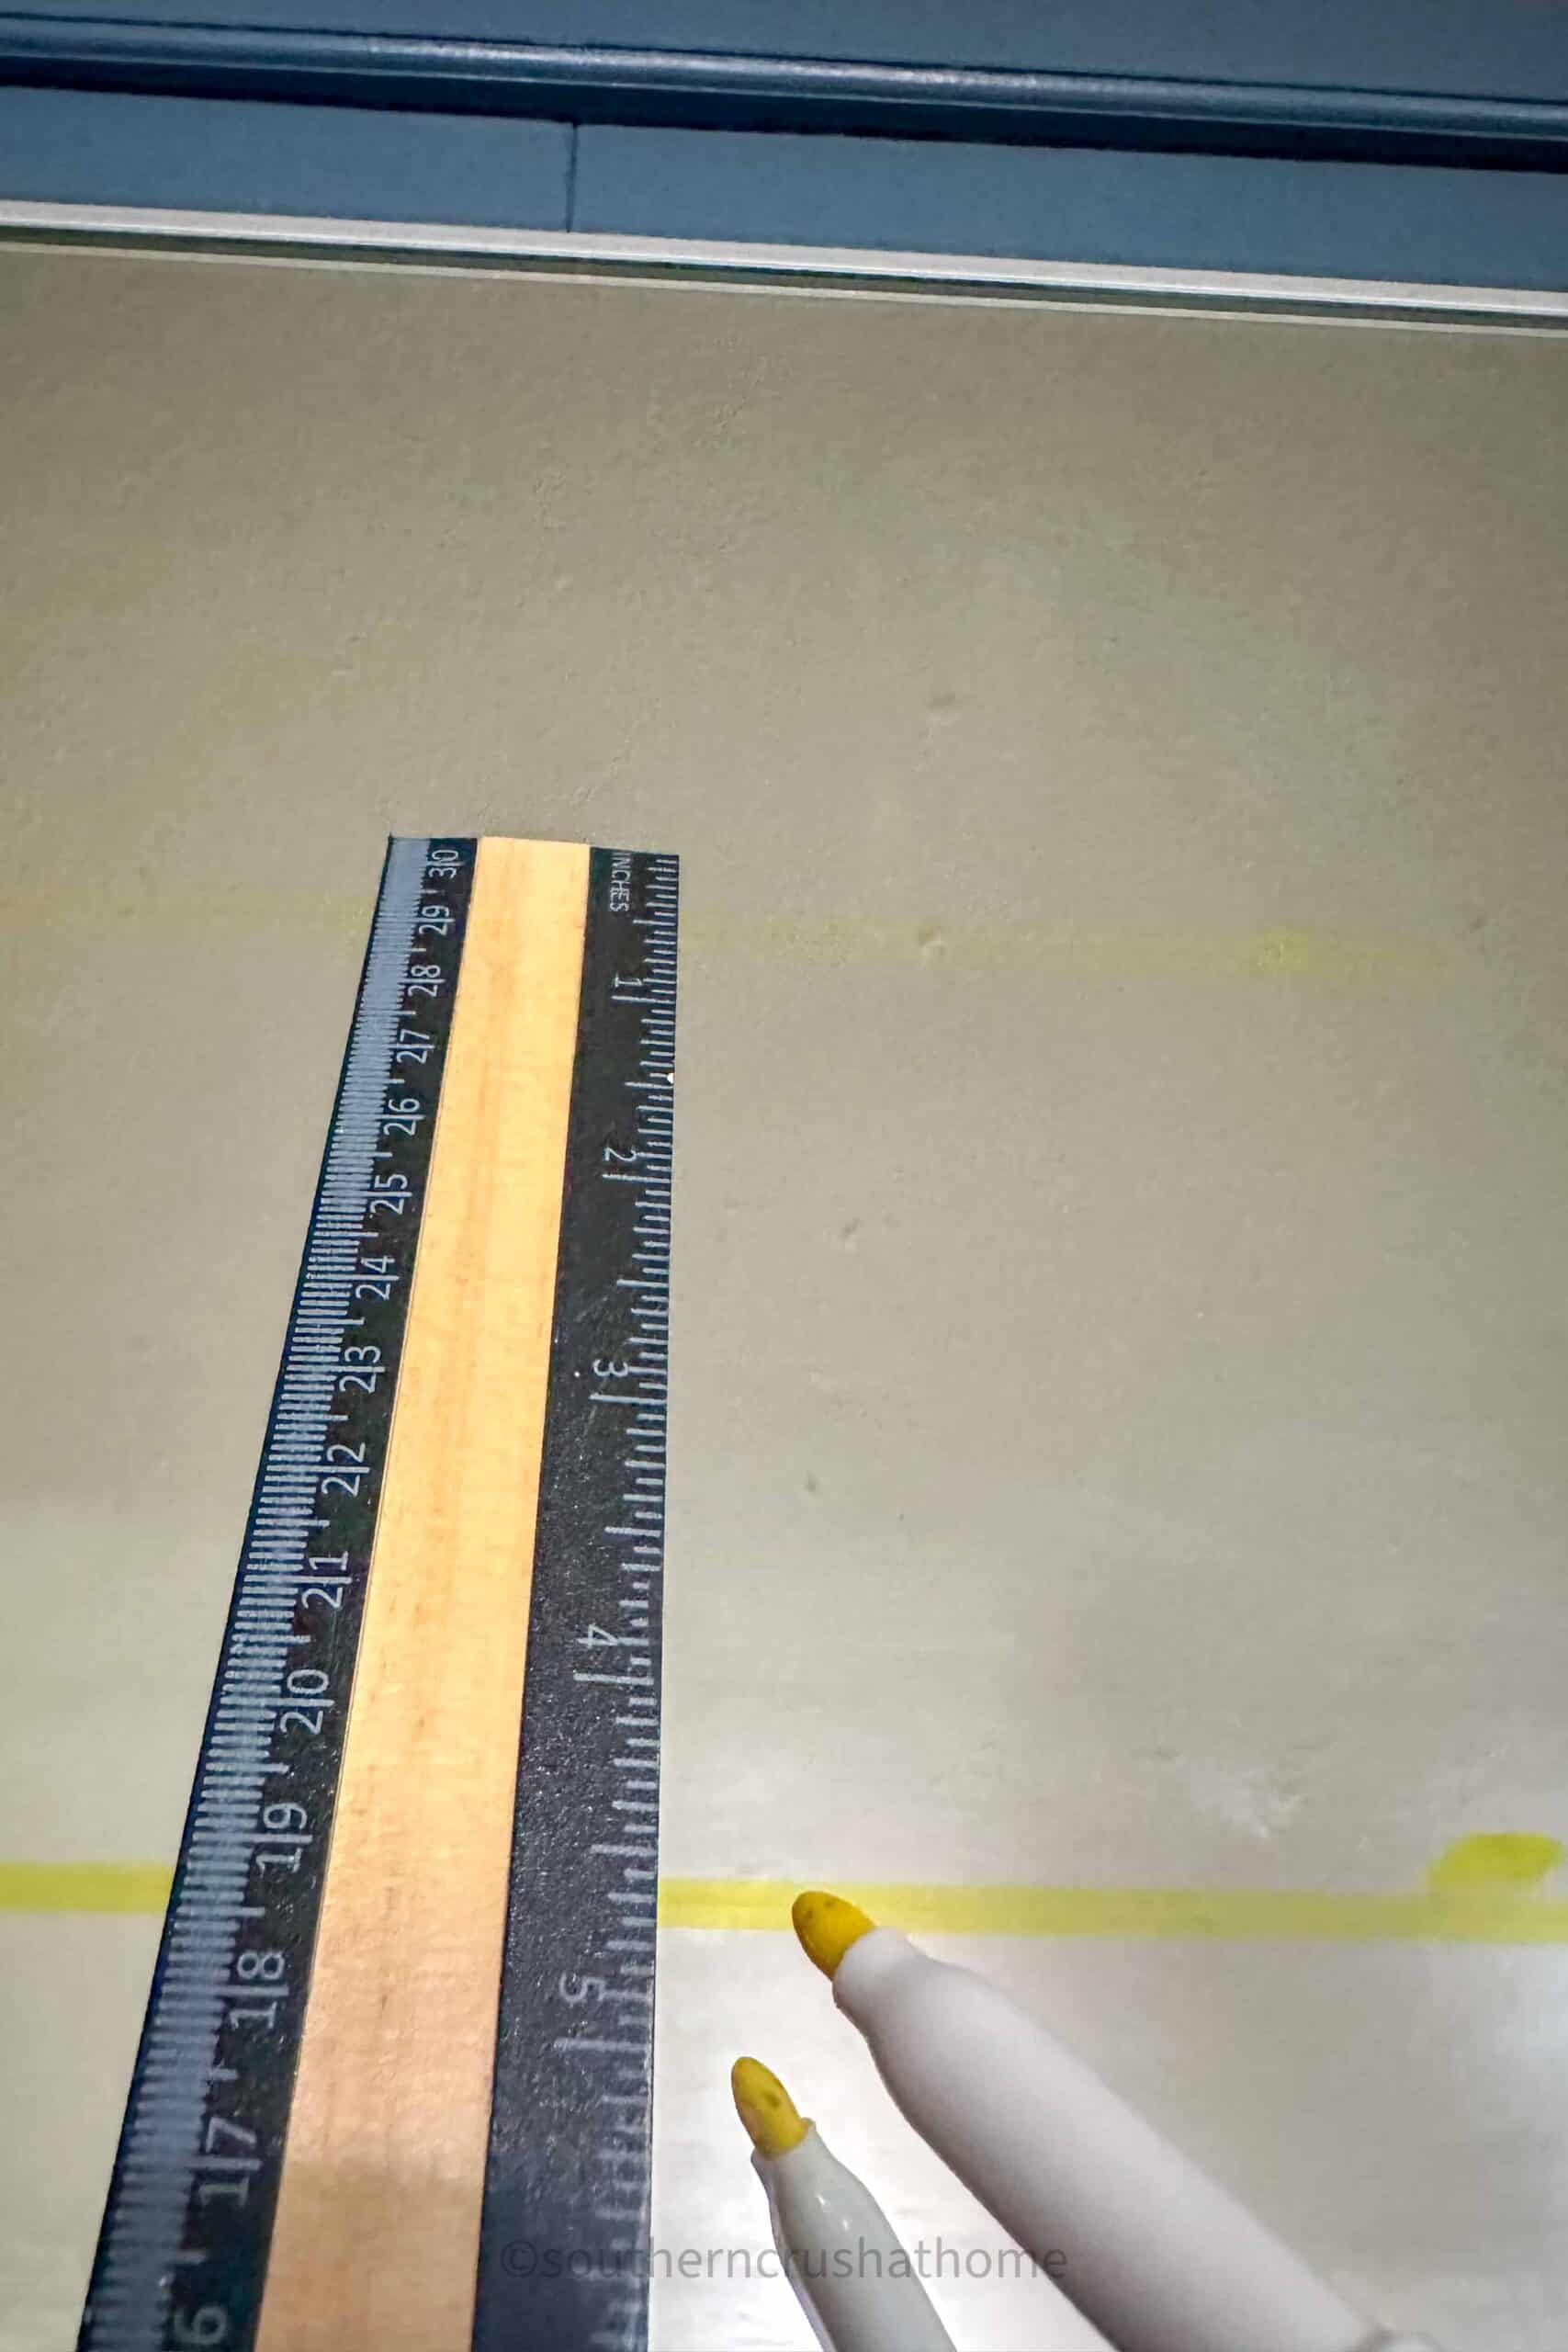 ruler and dry erase marker for measuring design placement